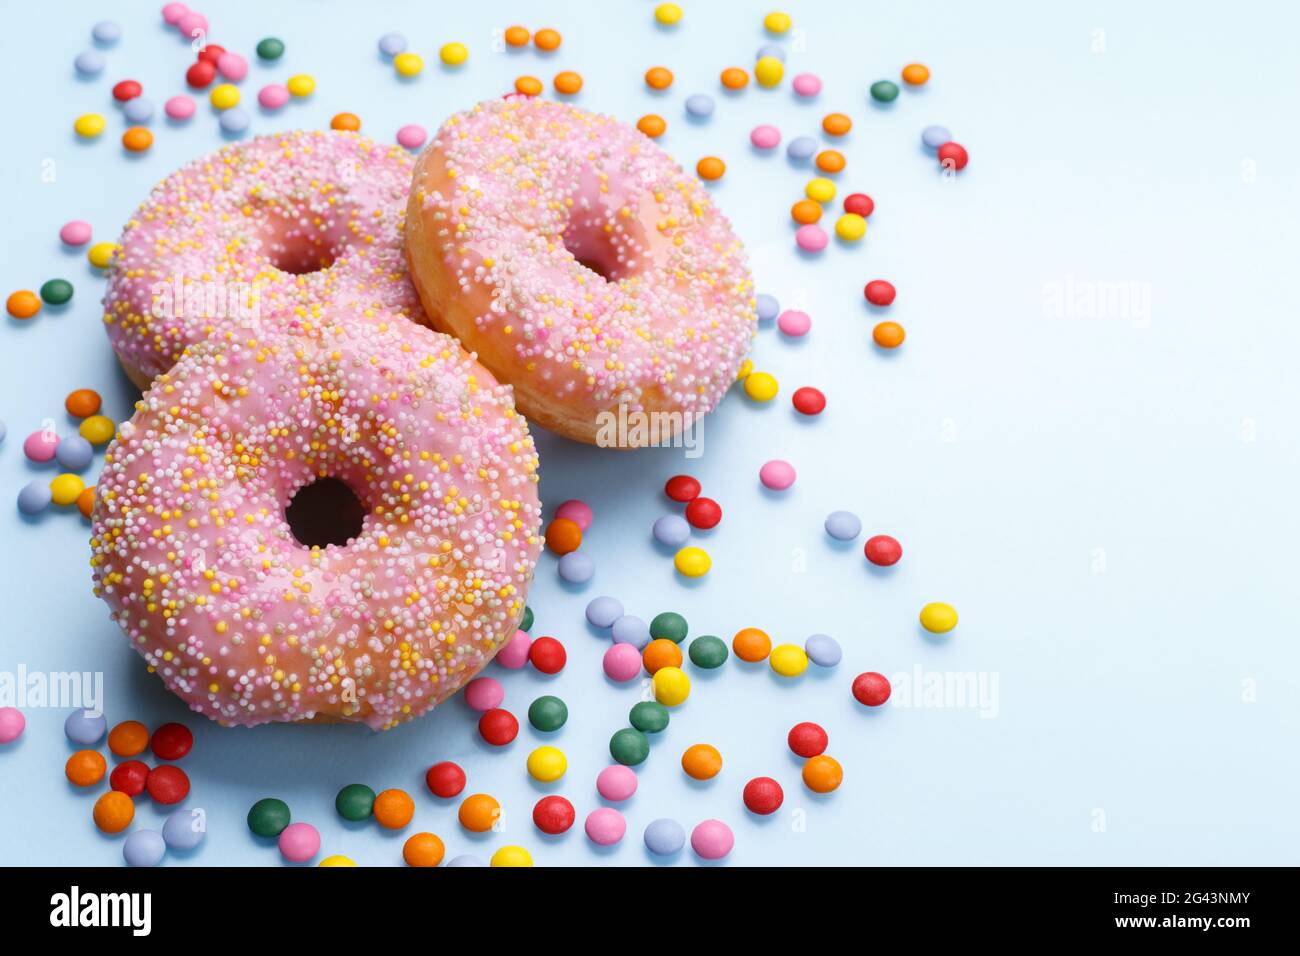 Pink doughnuts and candies on blue background, Stock Photo